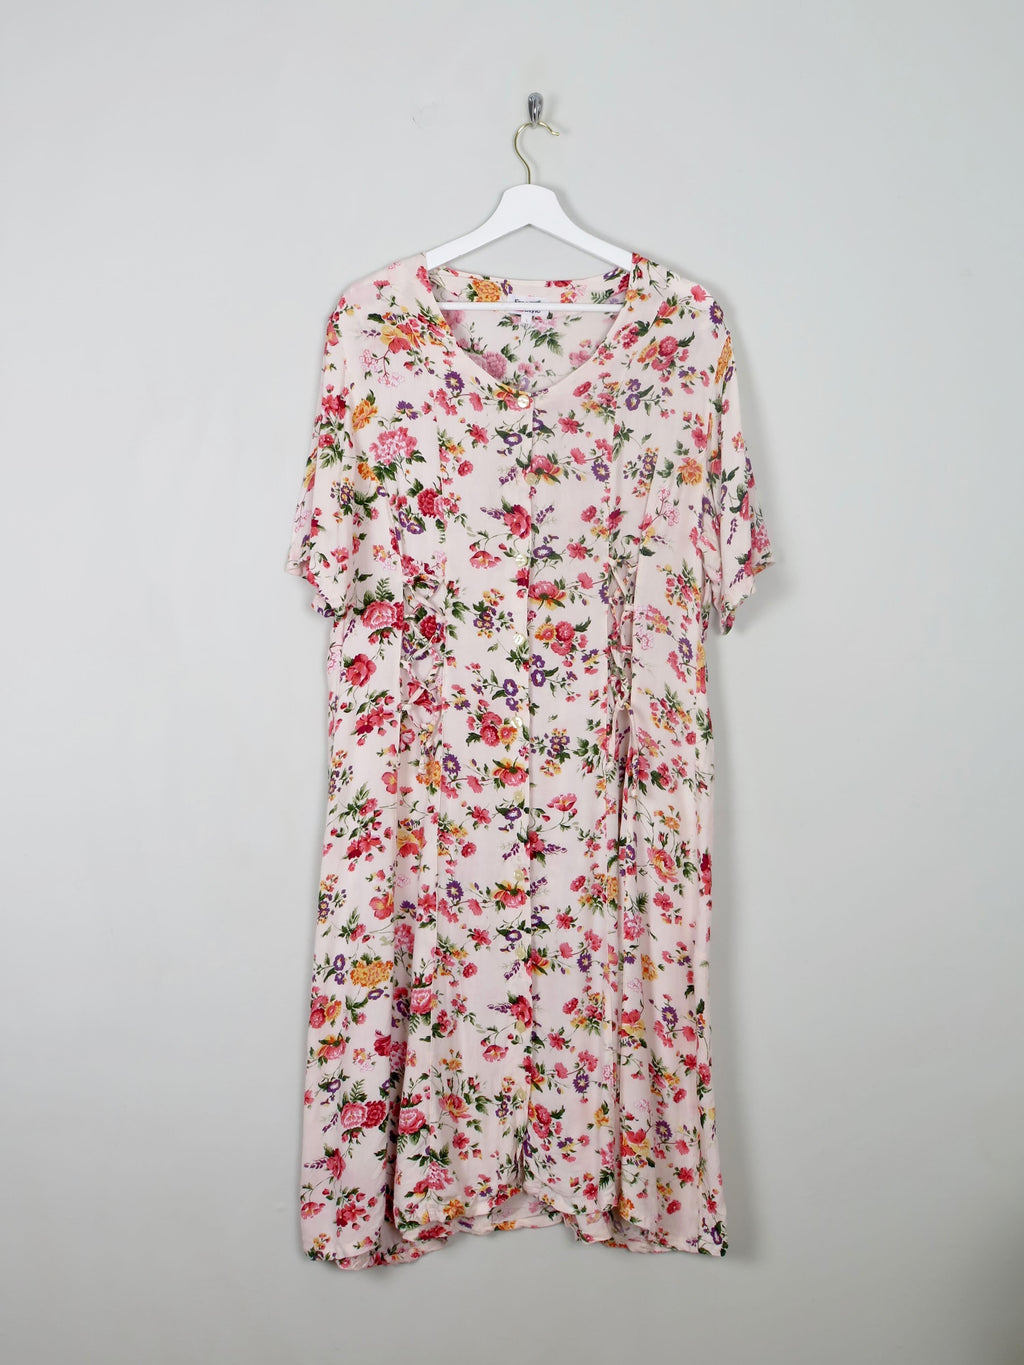 Vintage Floral Dress With Lace Up Detail L - The Harlequin